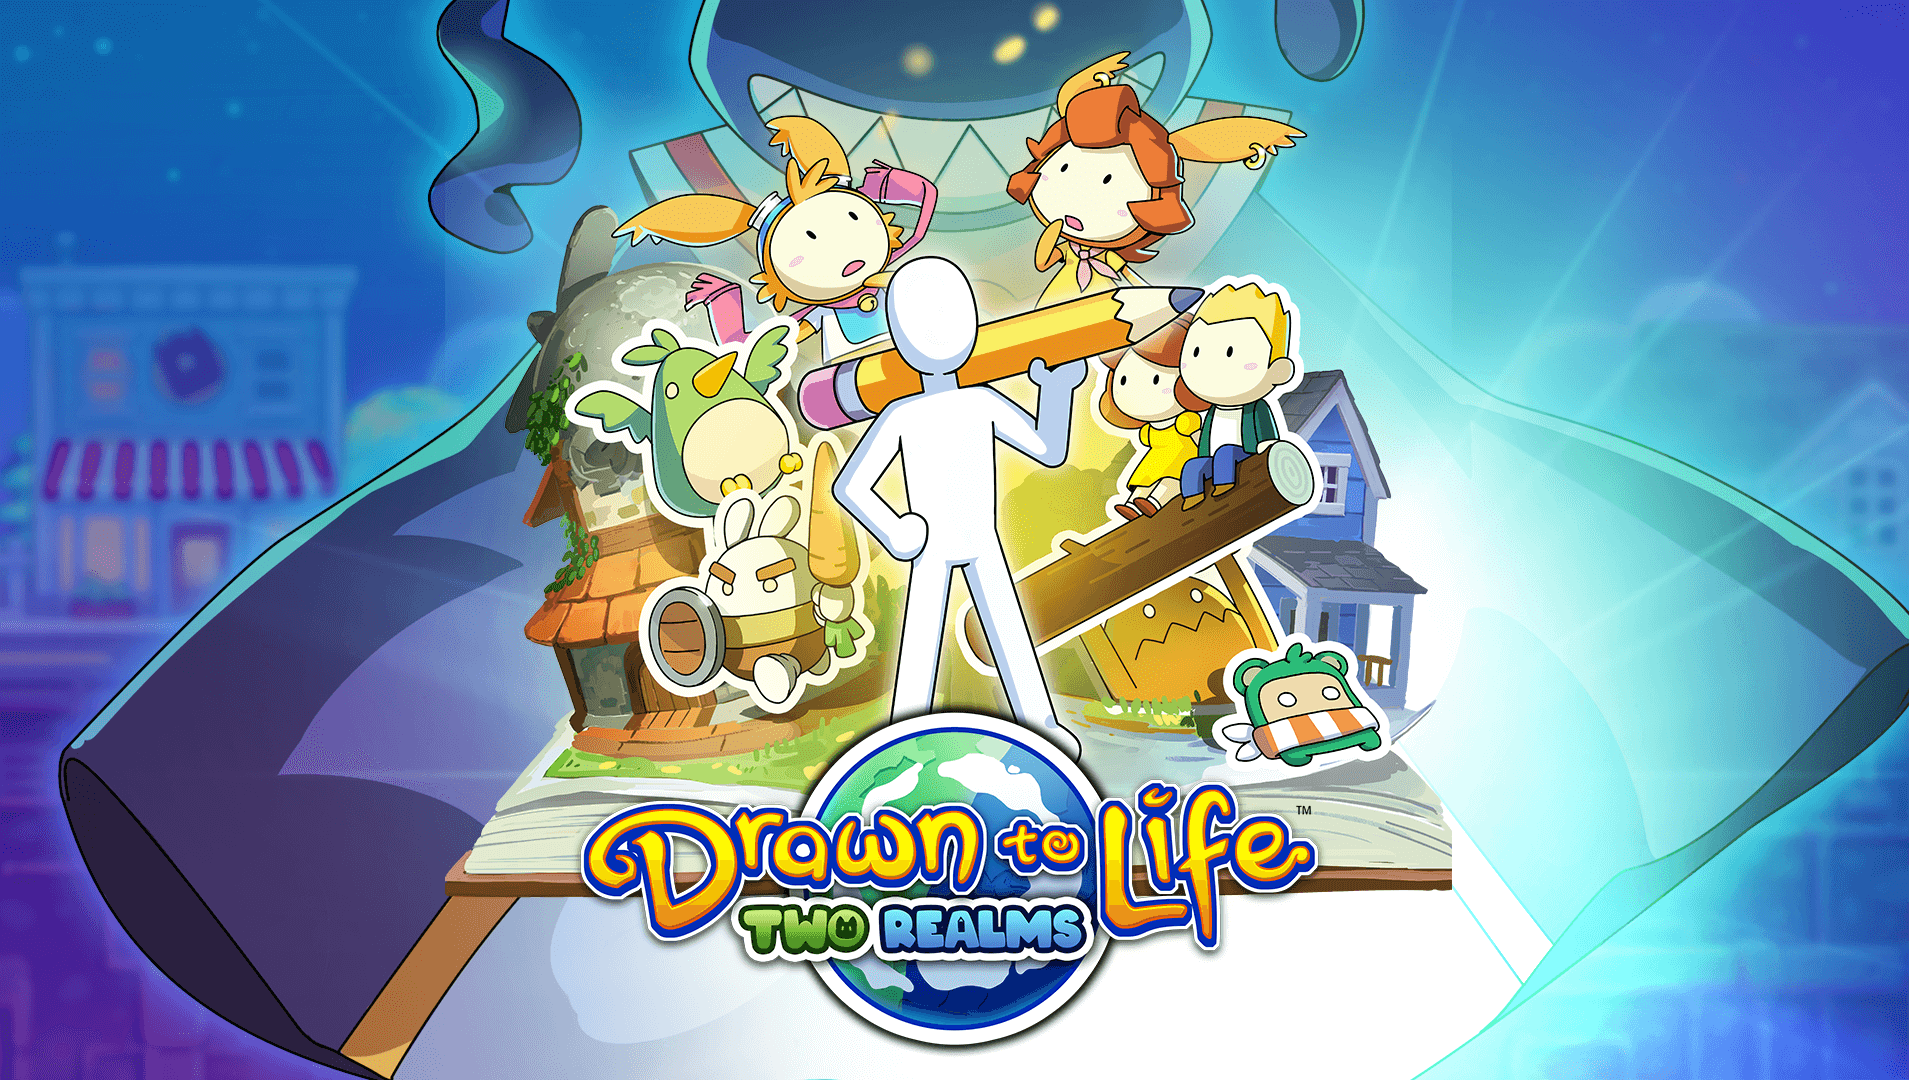 Drawn to Life: Two Realms Launches Today